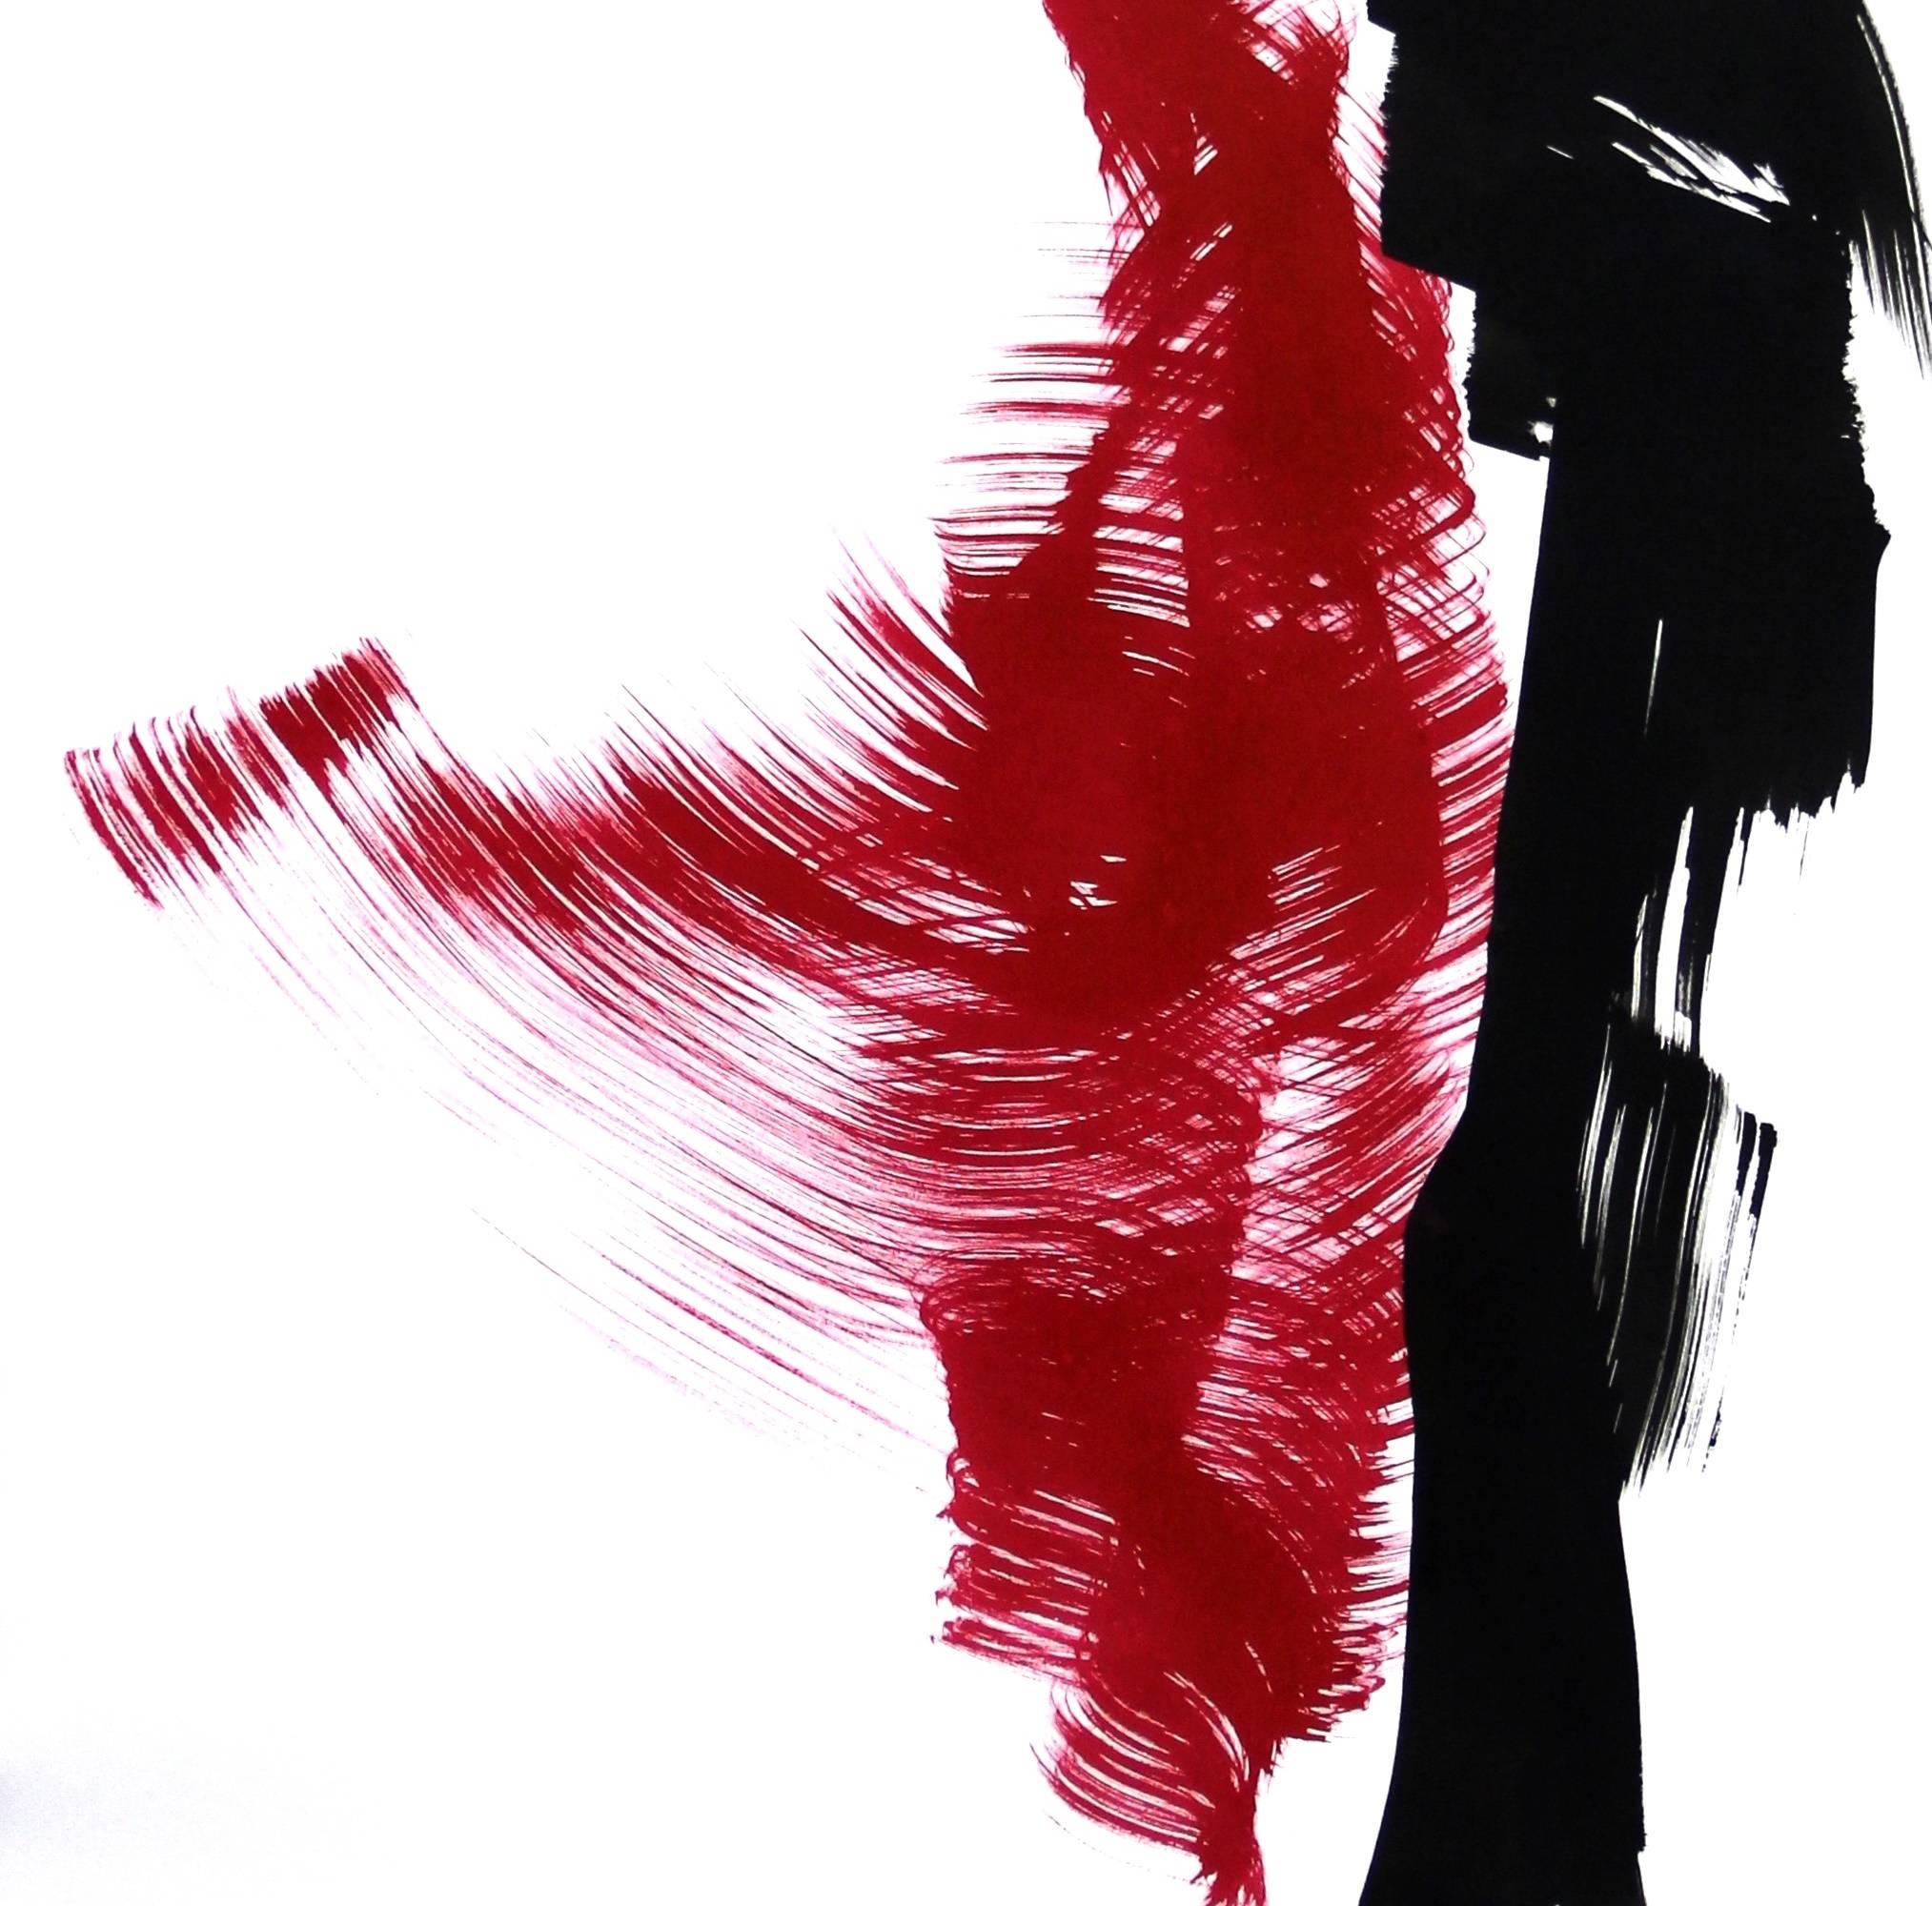 Dancers 7 - Red and Black Figures Embracing the Love of Movement and Life - Abstract Expressionist Painting by Bettina Mauel